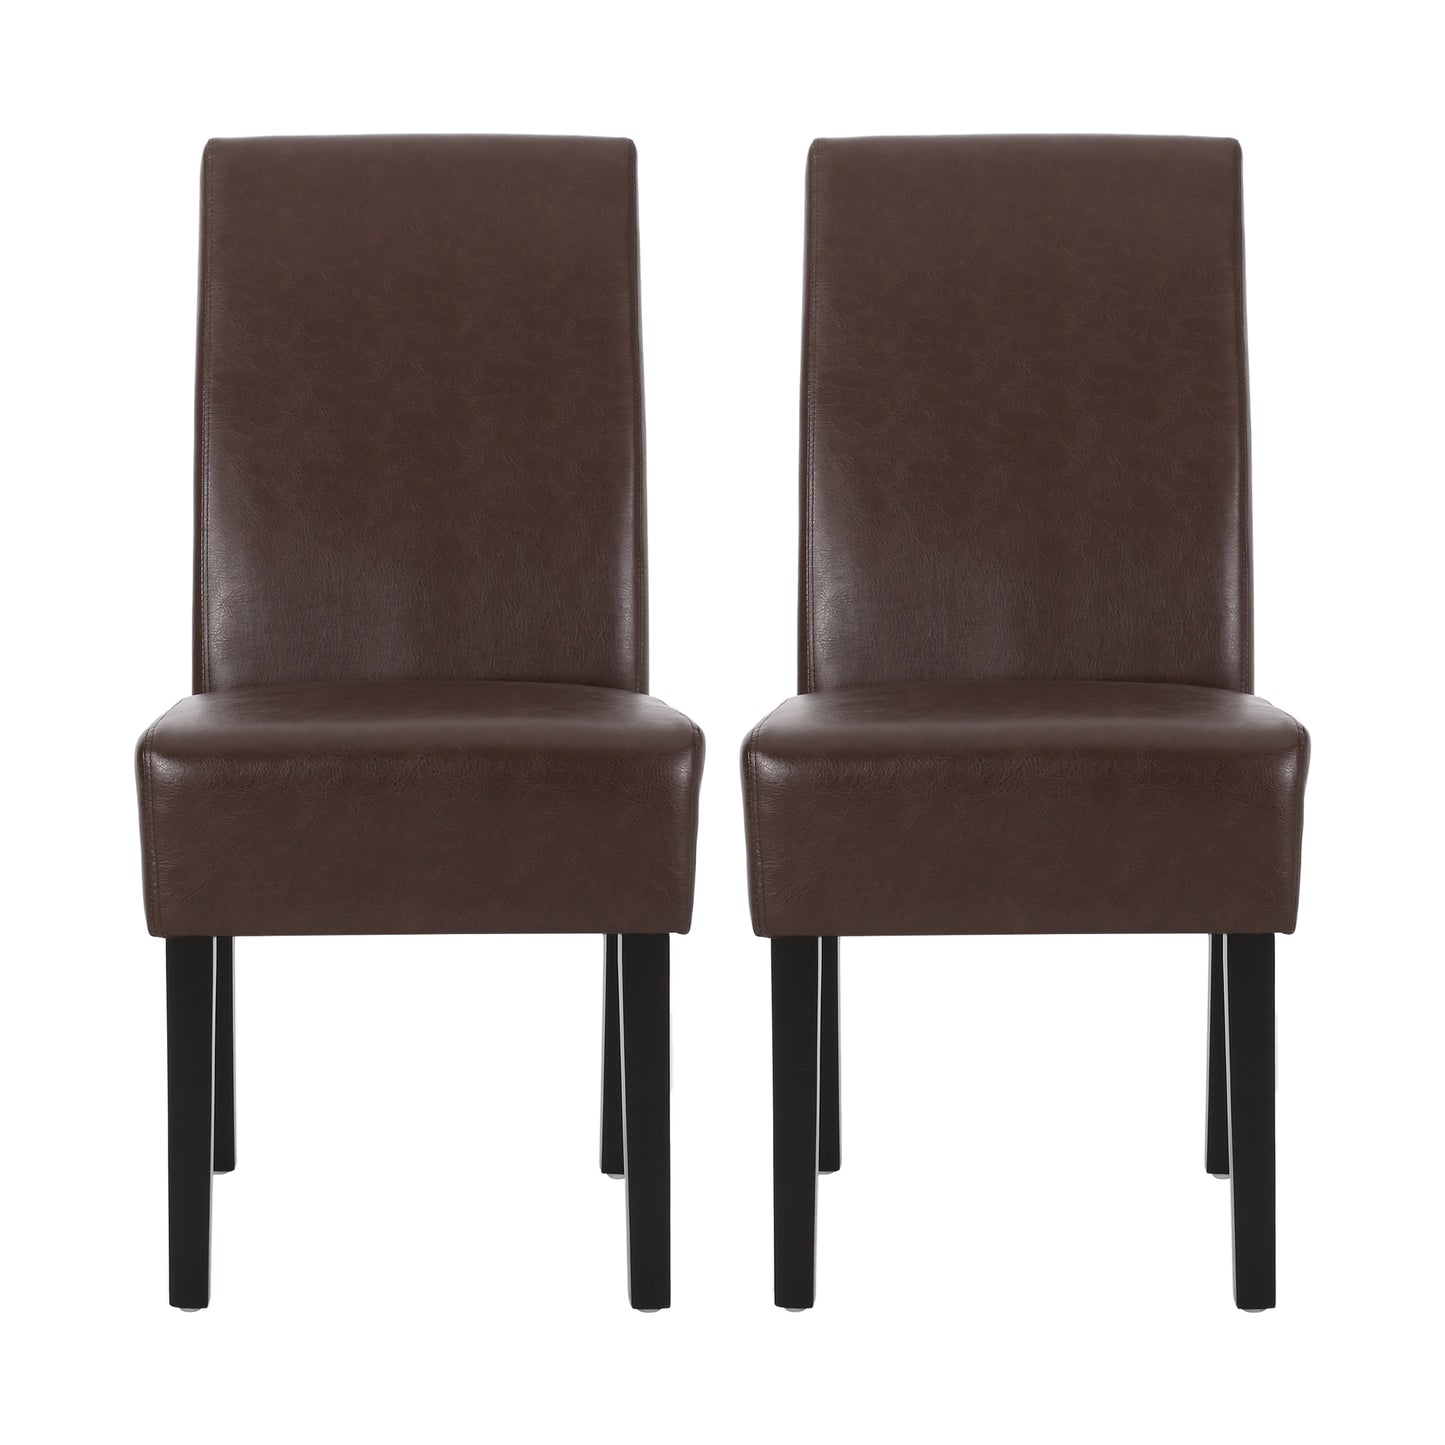 Thurber Contemporary Upholstered Dining Chairs, Set of 2